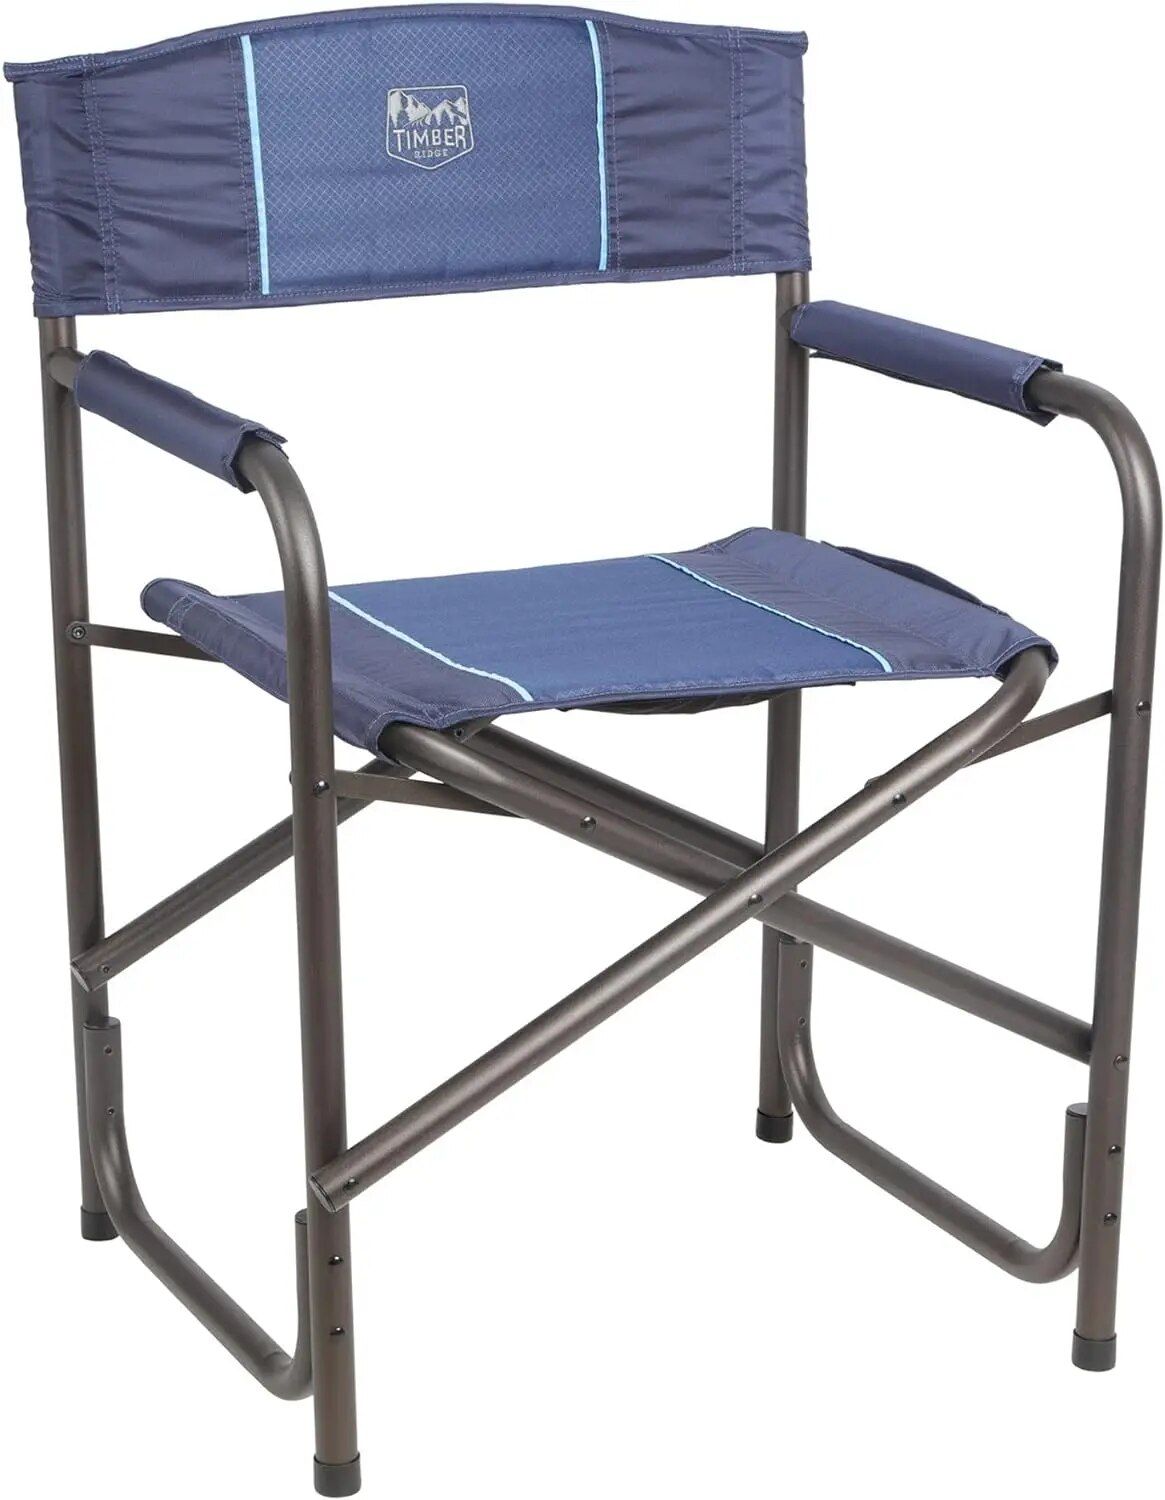 Heavy-Duty Collapsible Outdoor Lounge Chair 